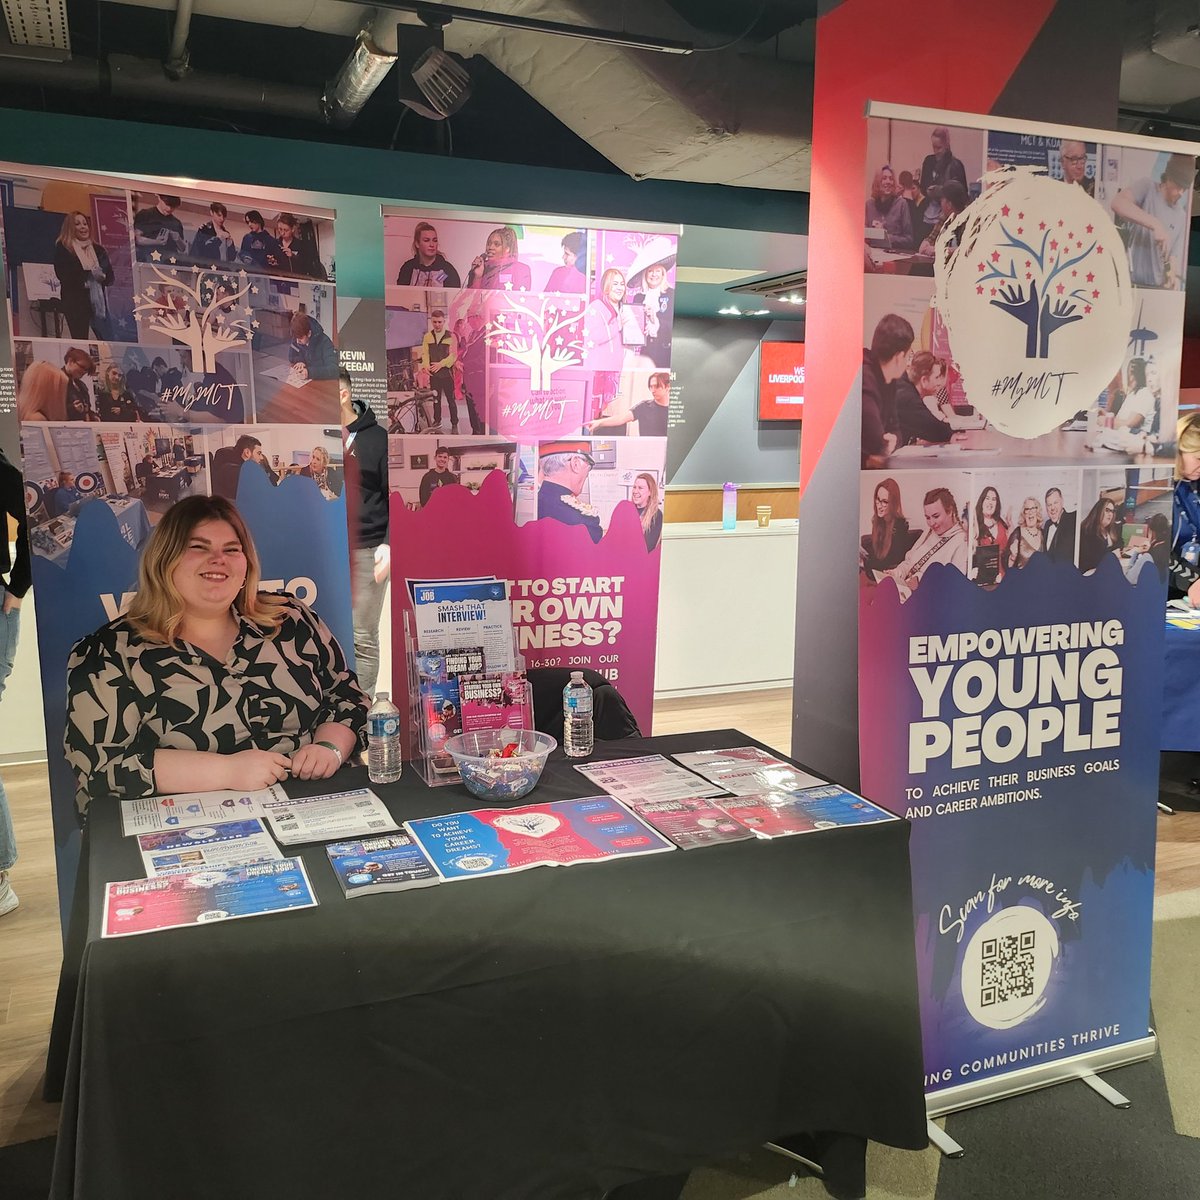 Thrilled to share that @MCTKev & Phoebe shone brightly as ambassadors of #MyMCT at the Road to Work event arranged by @DWPgovuk & @LFCFoundation Great to meet employers, providers & inspiring young minds, igniting passions for employability, unity, and entrepreneurial spirit